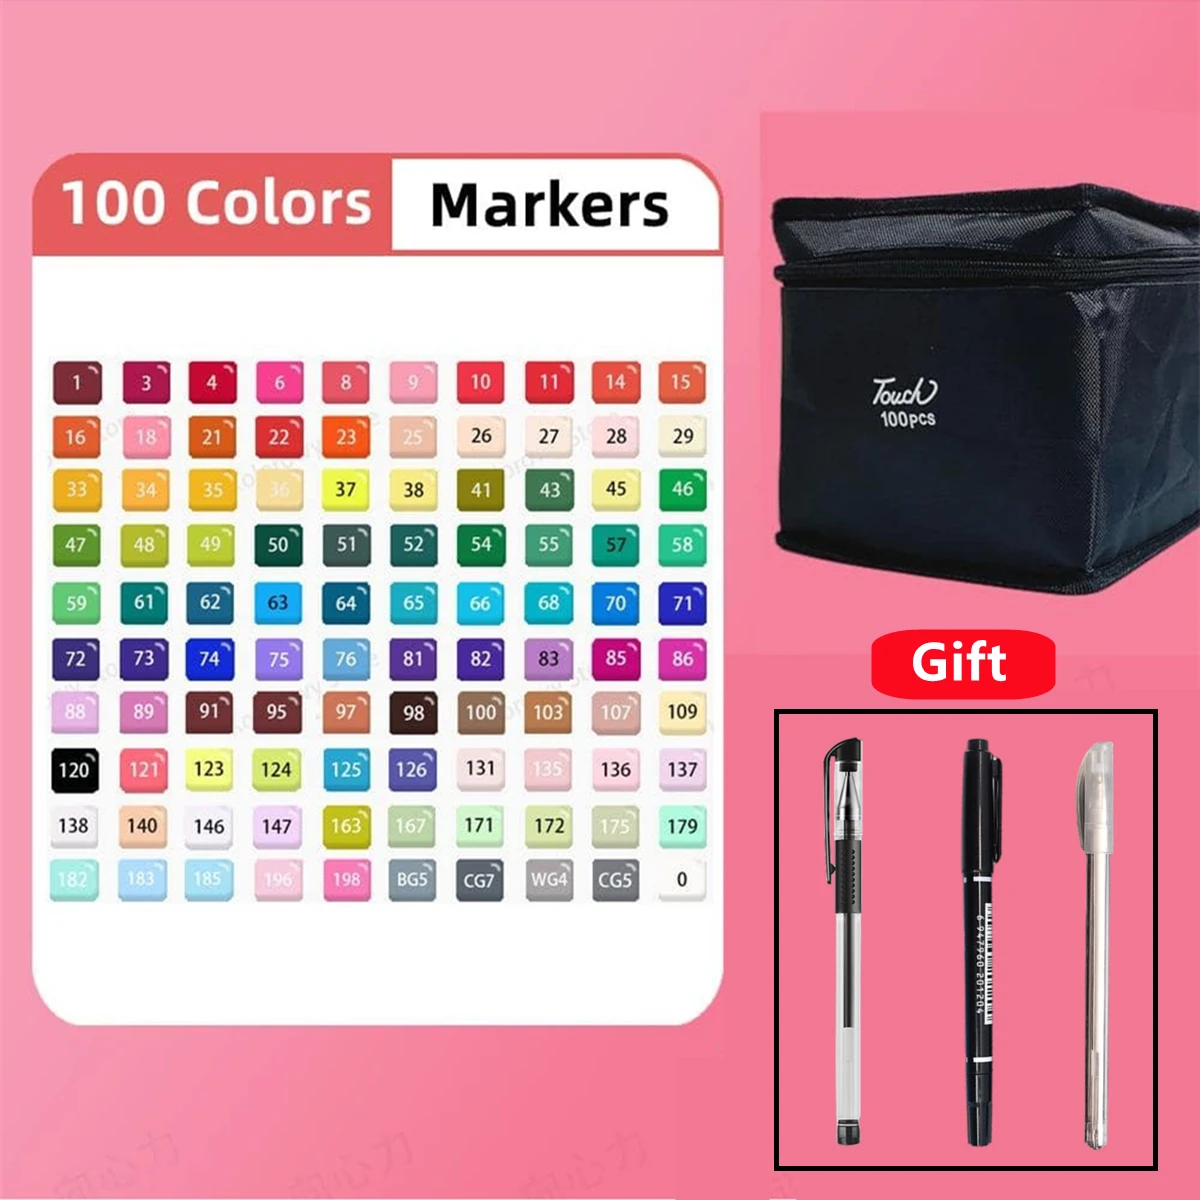 https://ae01.alicdn.com/kf/S900e77b7a1ef4f1cbff15bf50fd1b650m/12-100-Colors-Alcohol-Markers-Dual-Tip-Sketch-Manga-Markers-Set-for-Kids-Adults-Artists-Painting.jpg